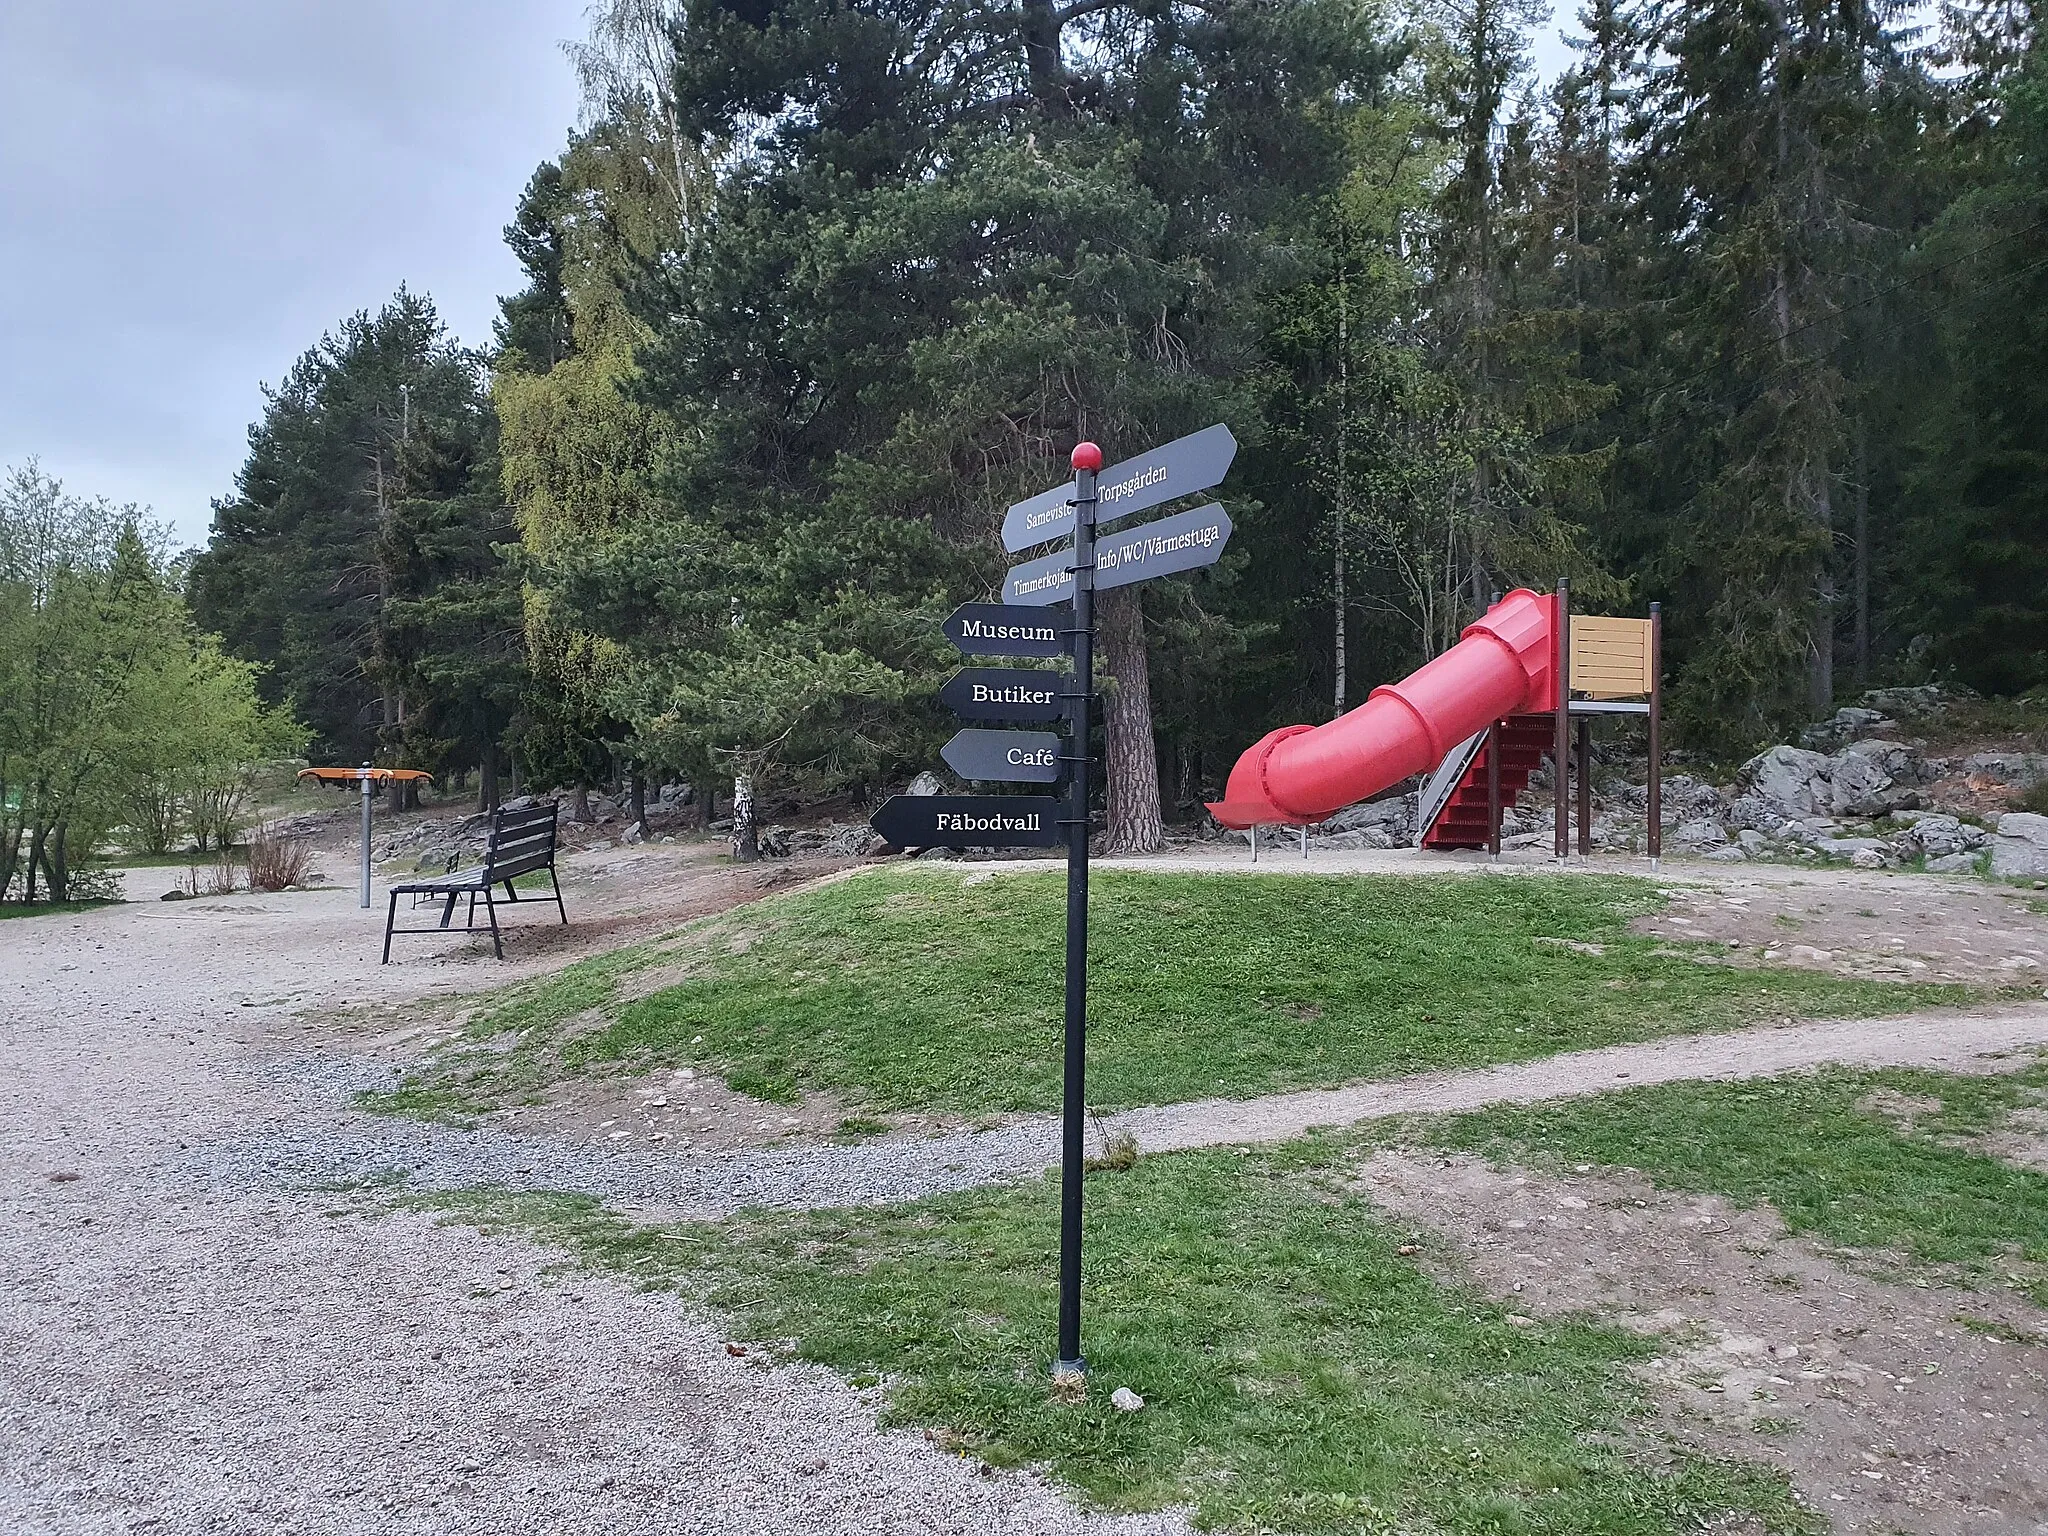 Photo showing: The playground of Norra stadsberget in Medelpad, Sweden